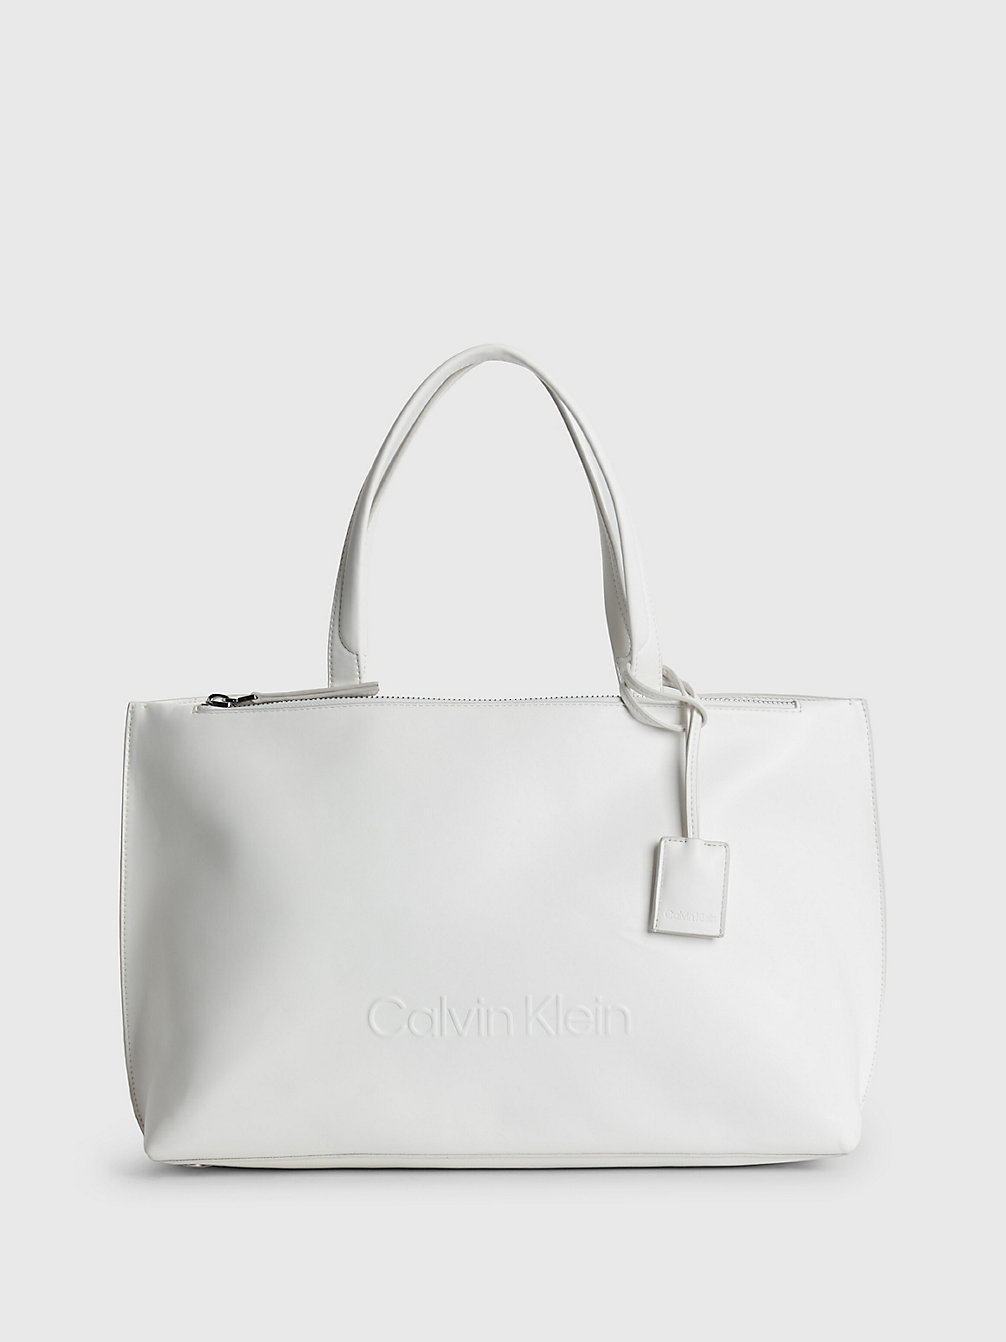 BRIGHT WHITE Recycled Tote Bag undefined women Calvin Klein